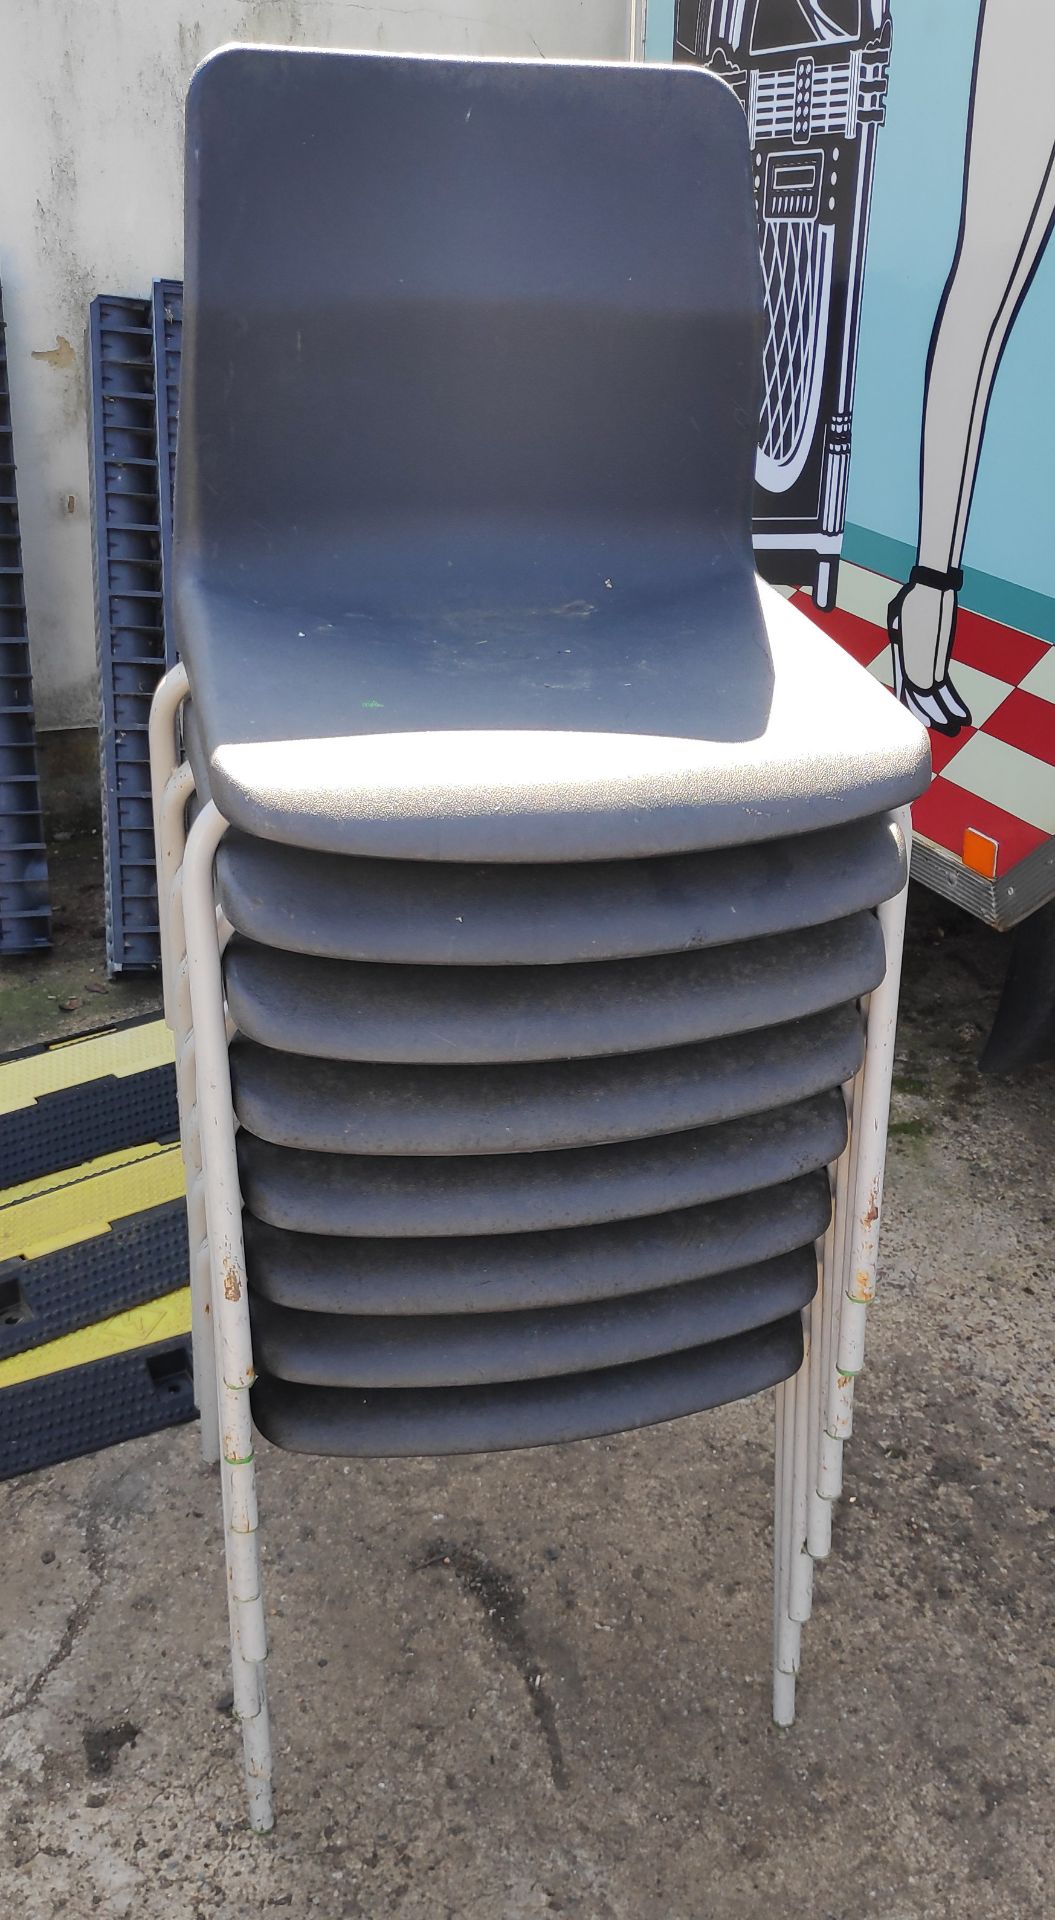 24 x Stackable Chairs - CL682 - Location: Bedford NN29